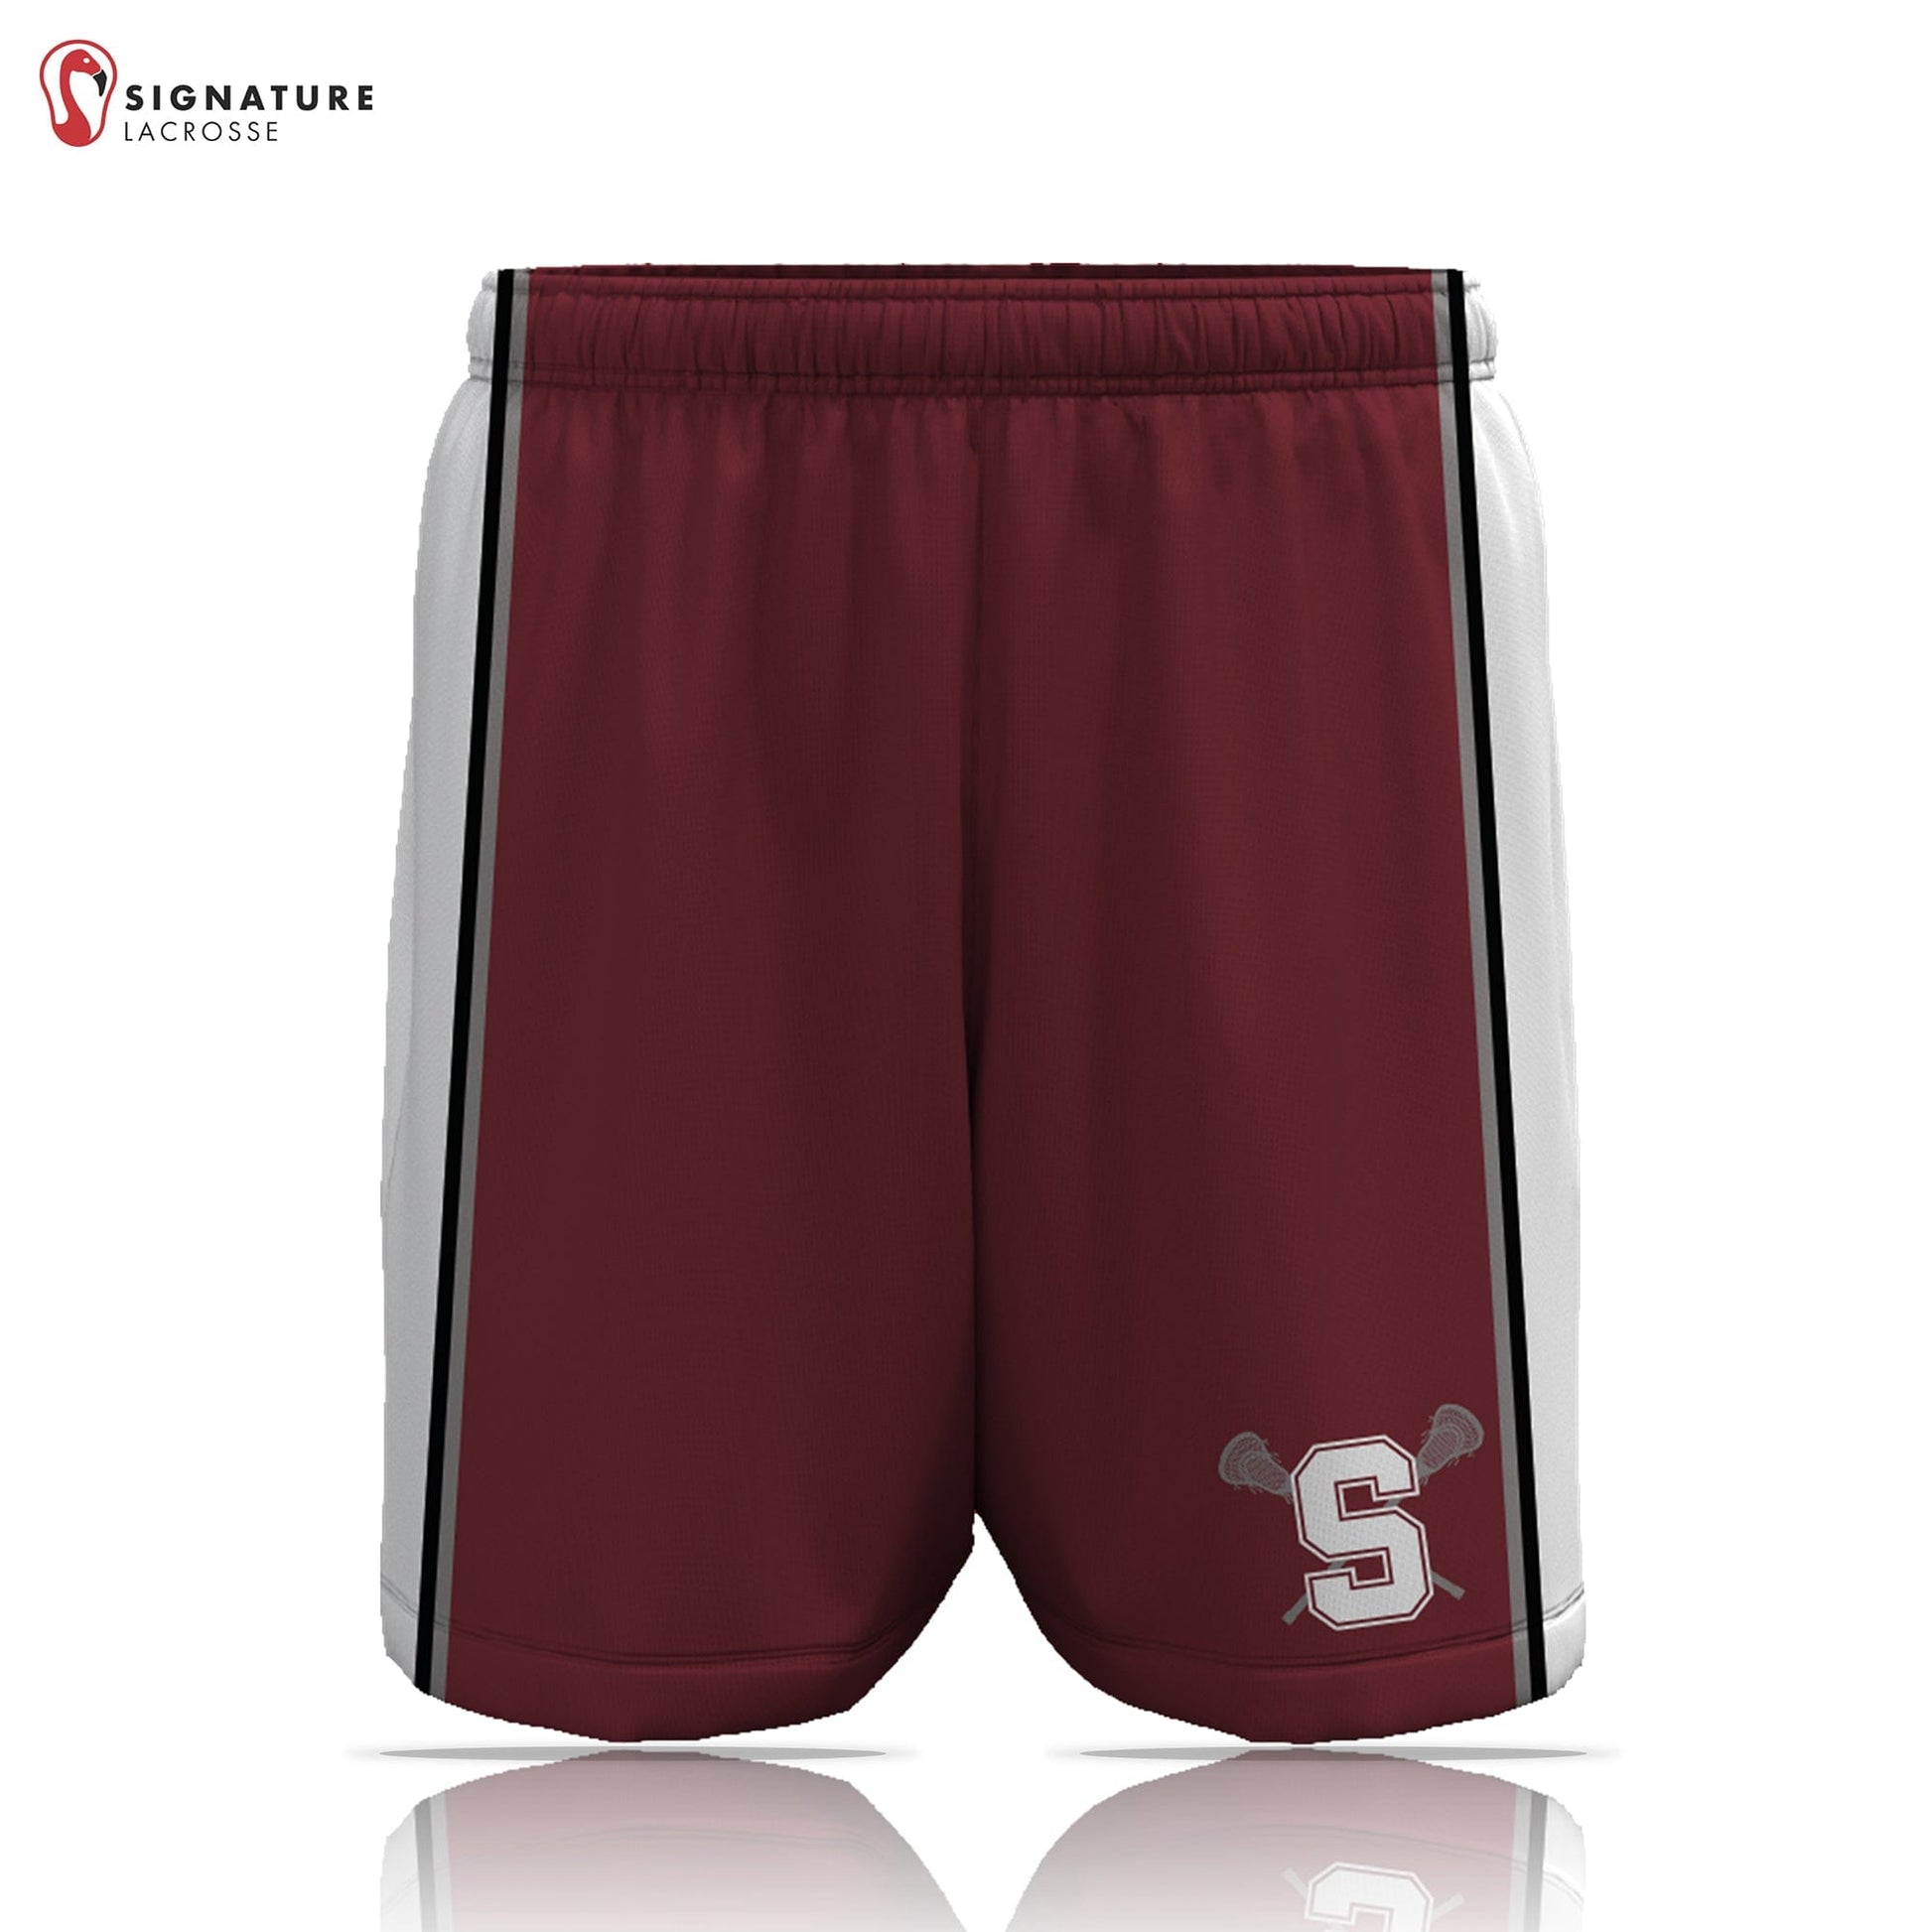 State College Men's Player Game Shorts: 5-6 Signature Lacrosse